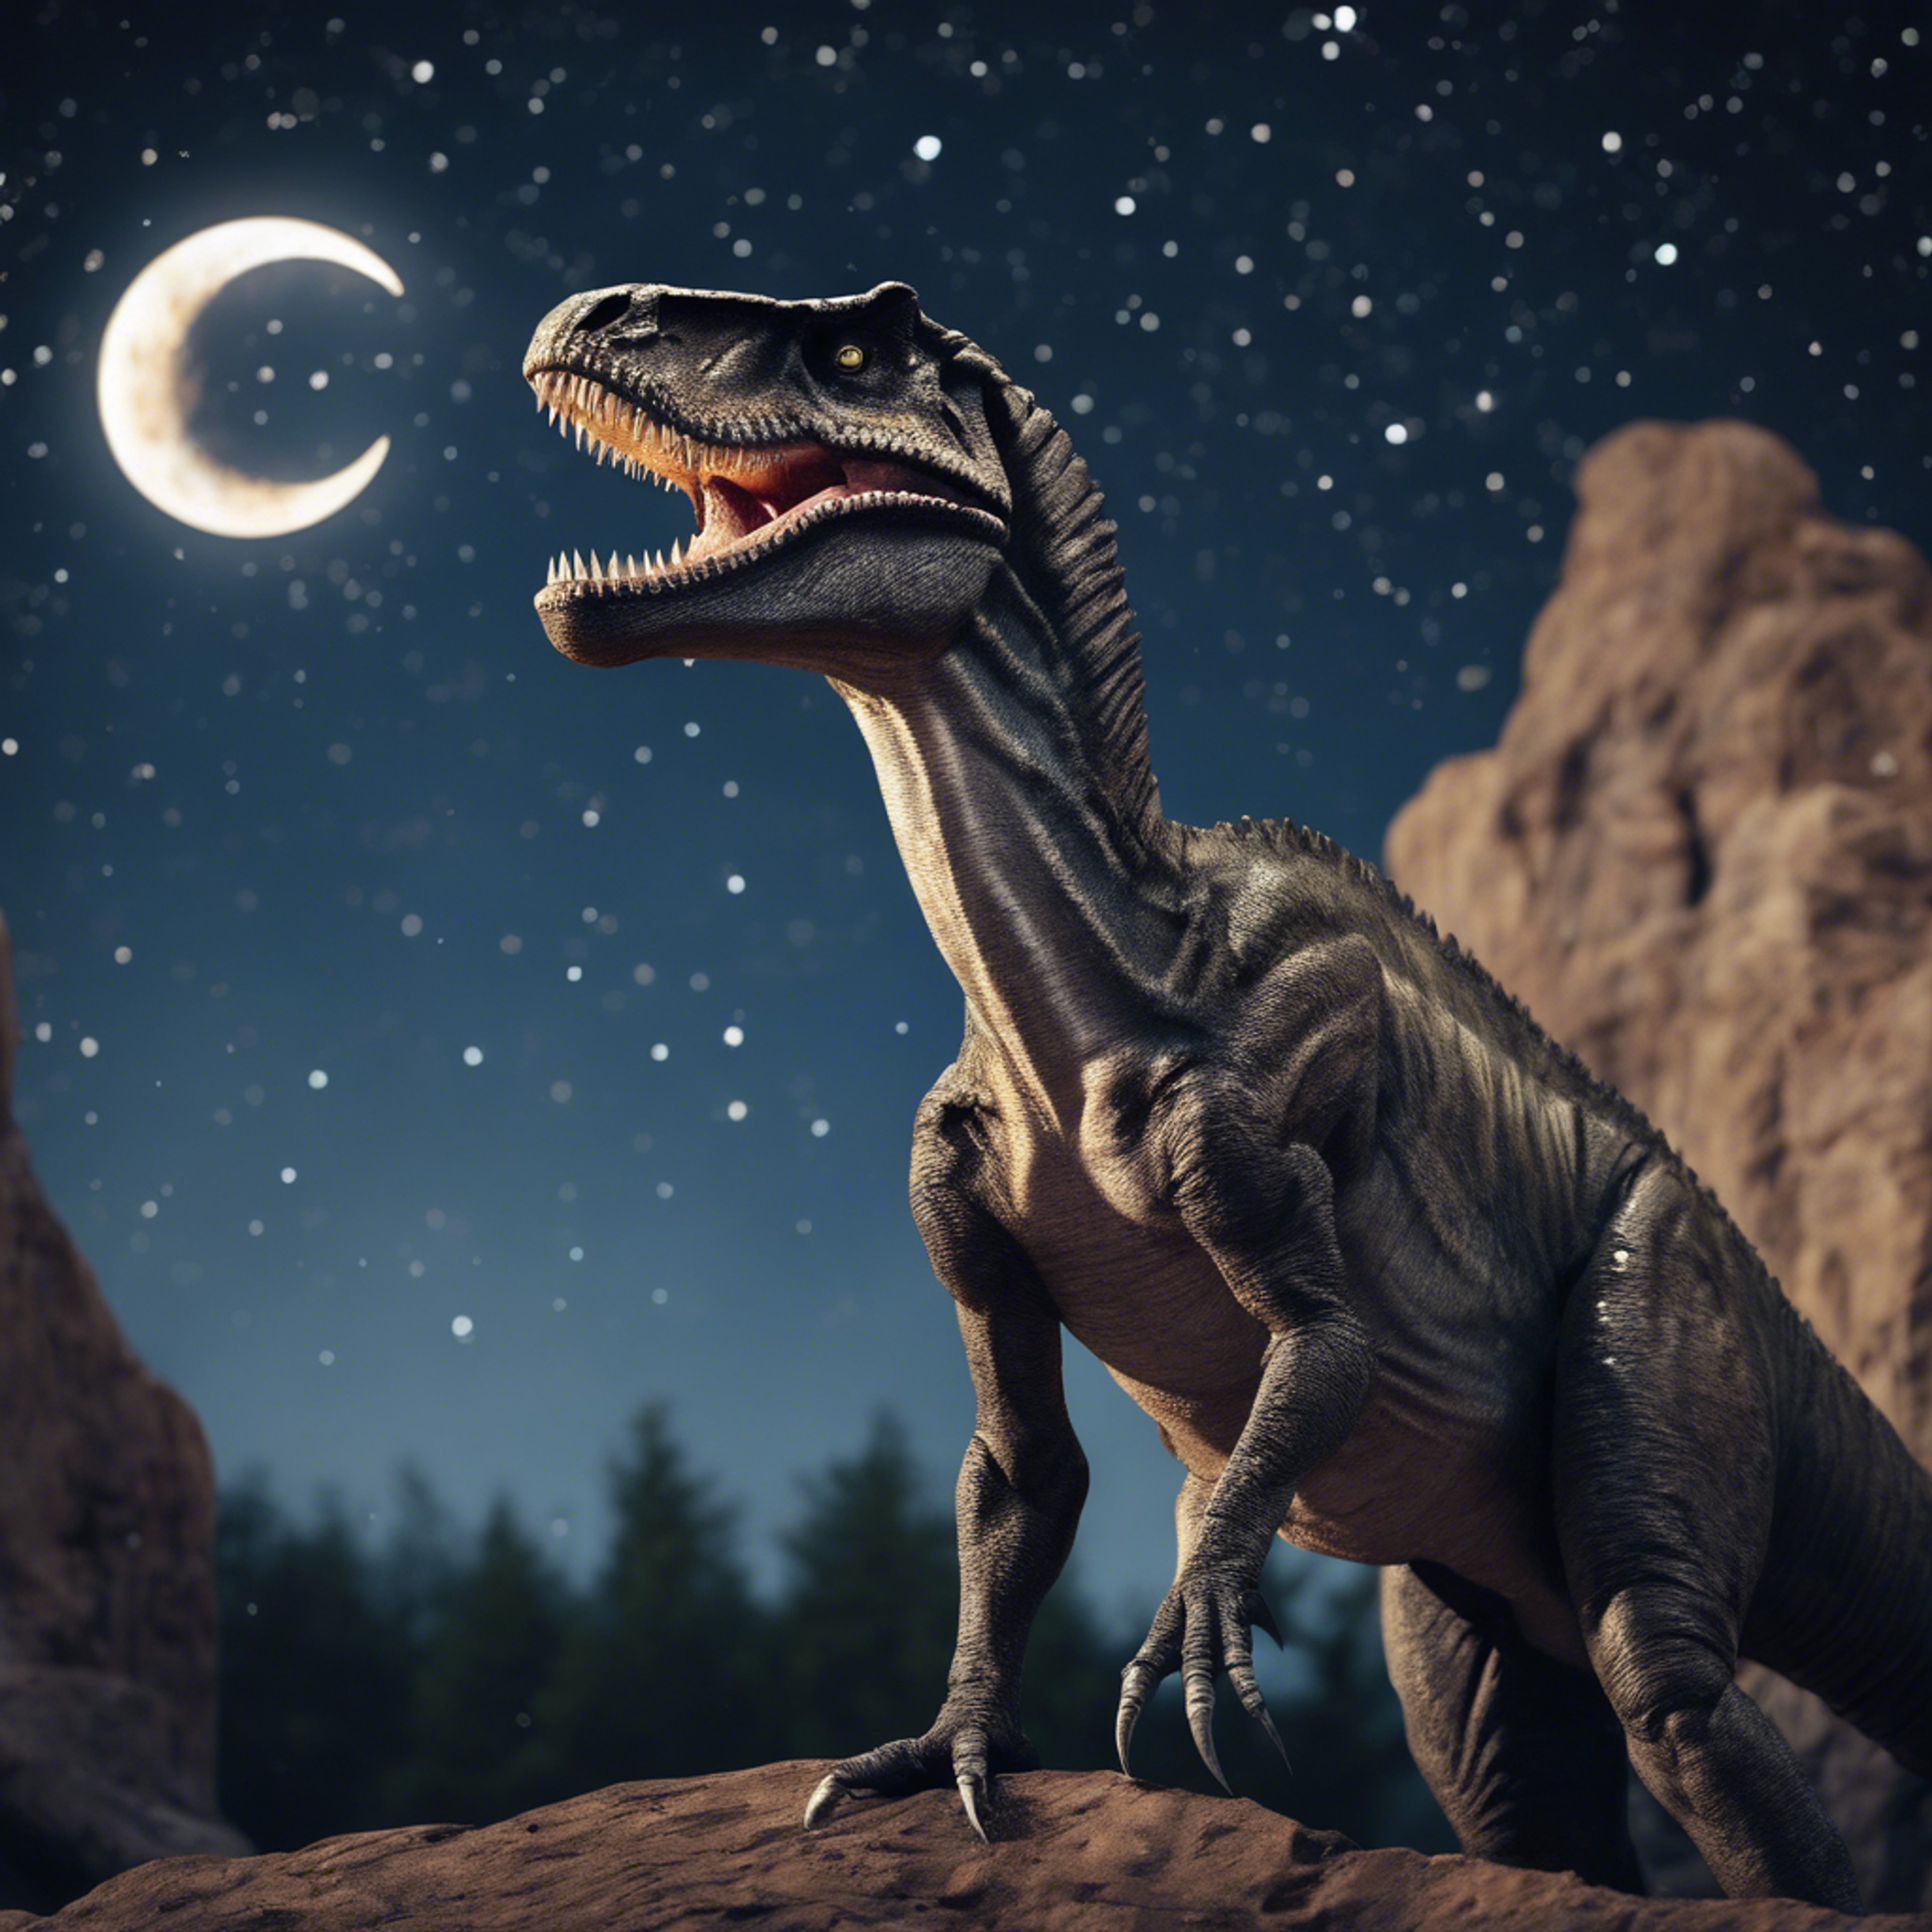 An Allosaurus under the bright starry night sky, howling at the crescent moon delicately. ورق الجدران[f8d2841798534275b963]